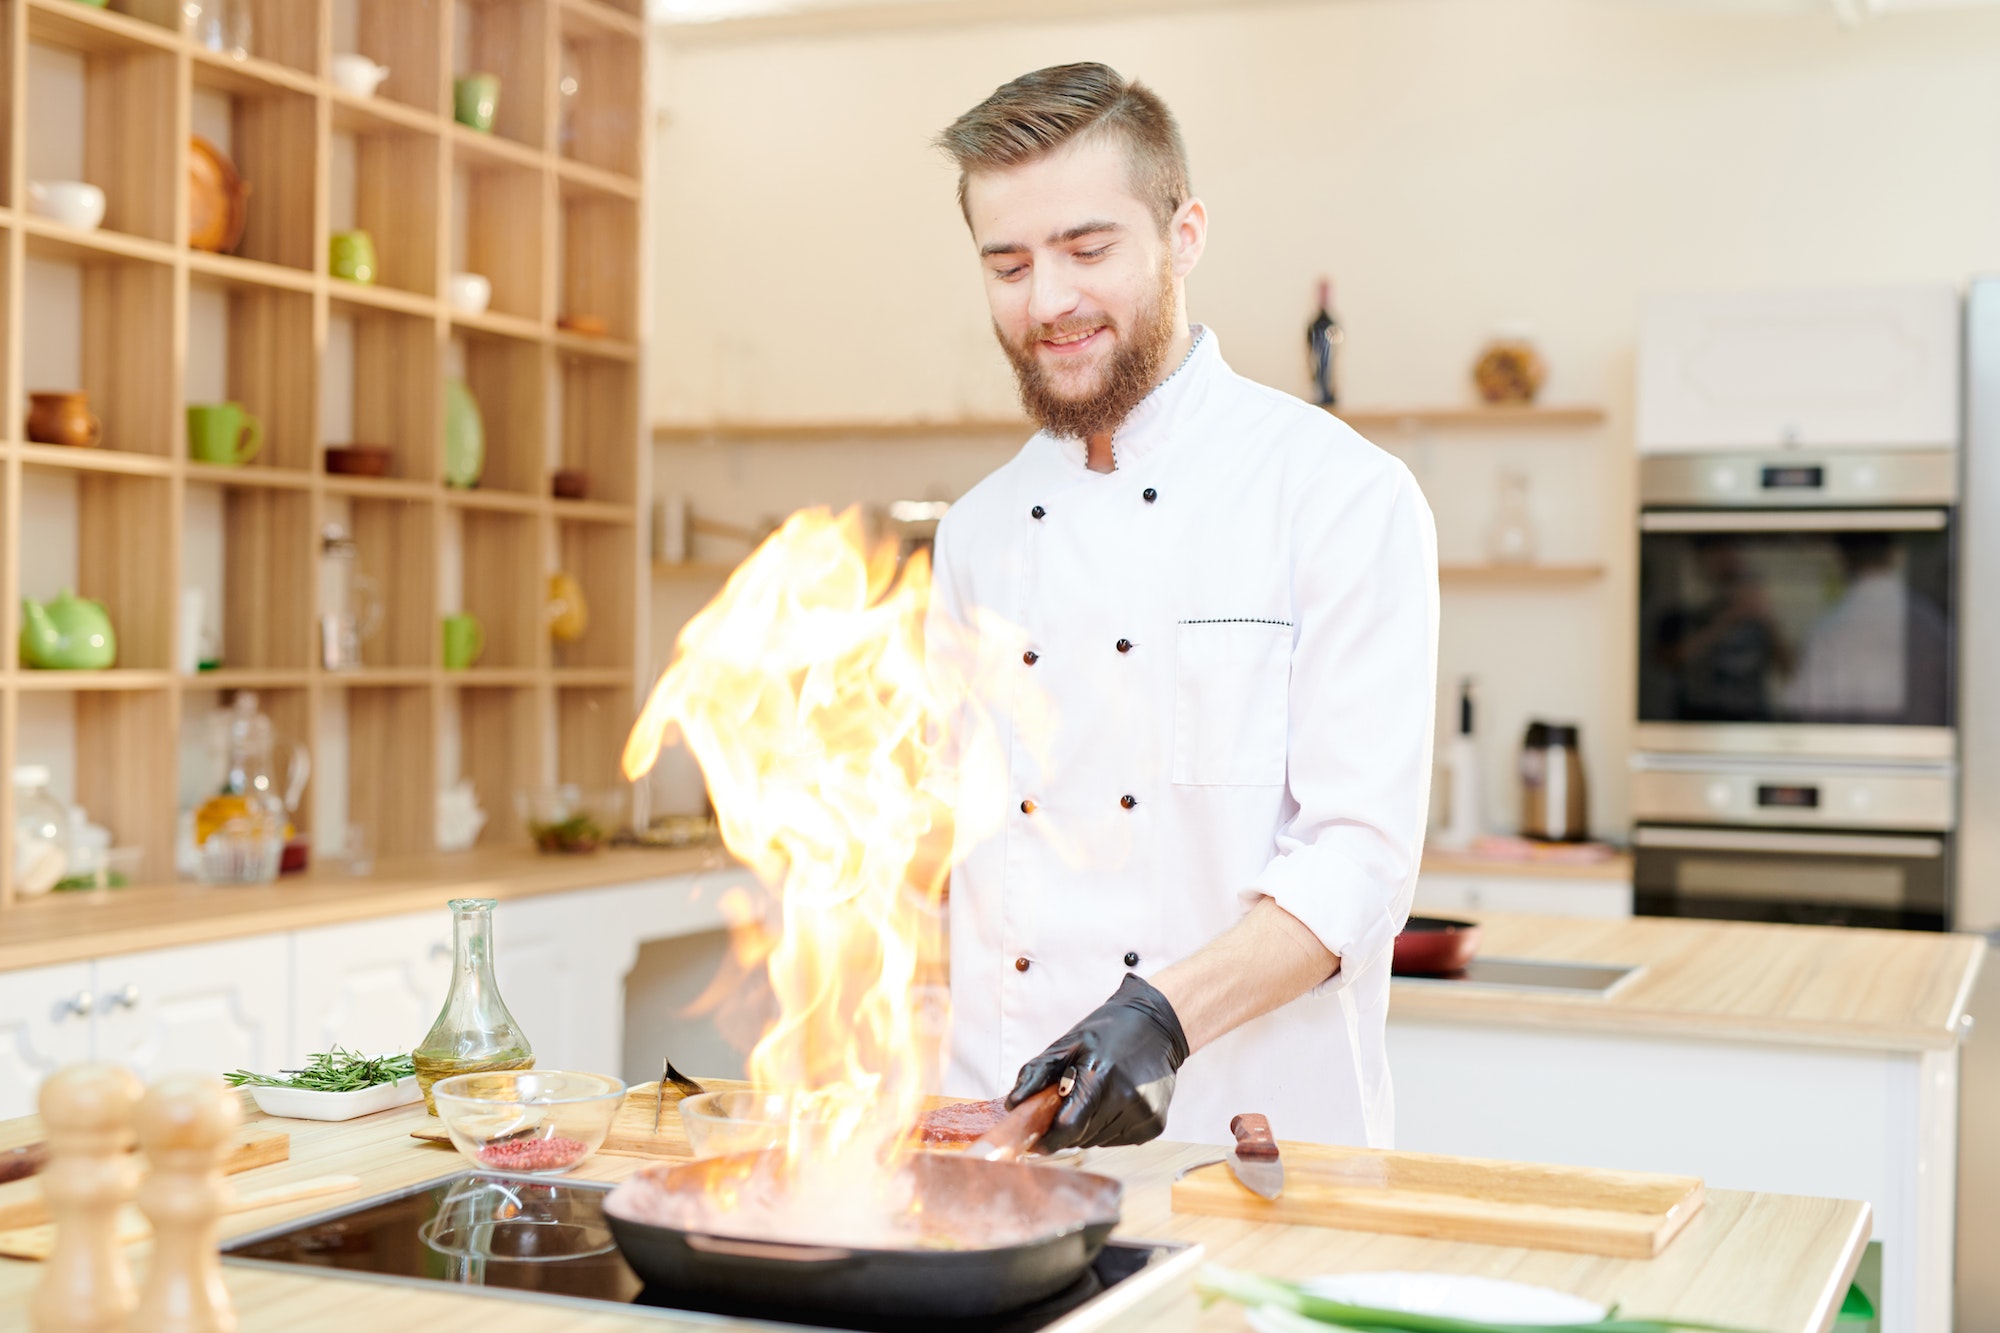 Smiling Chef Cooking Flambe